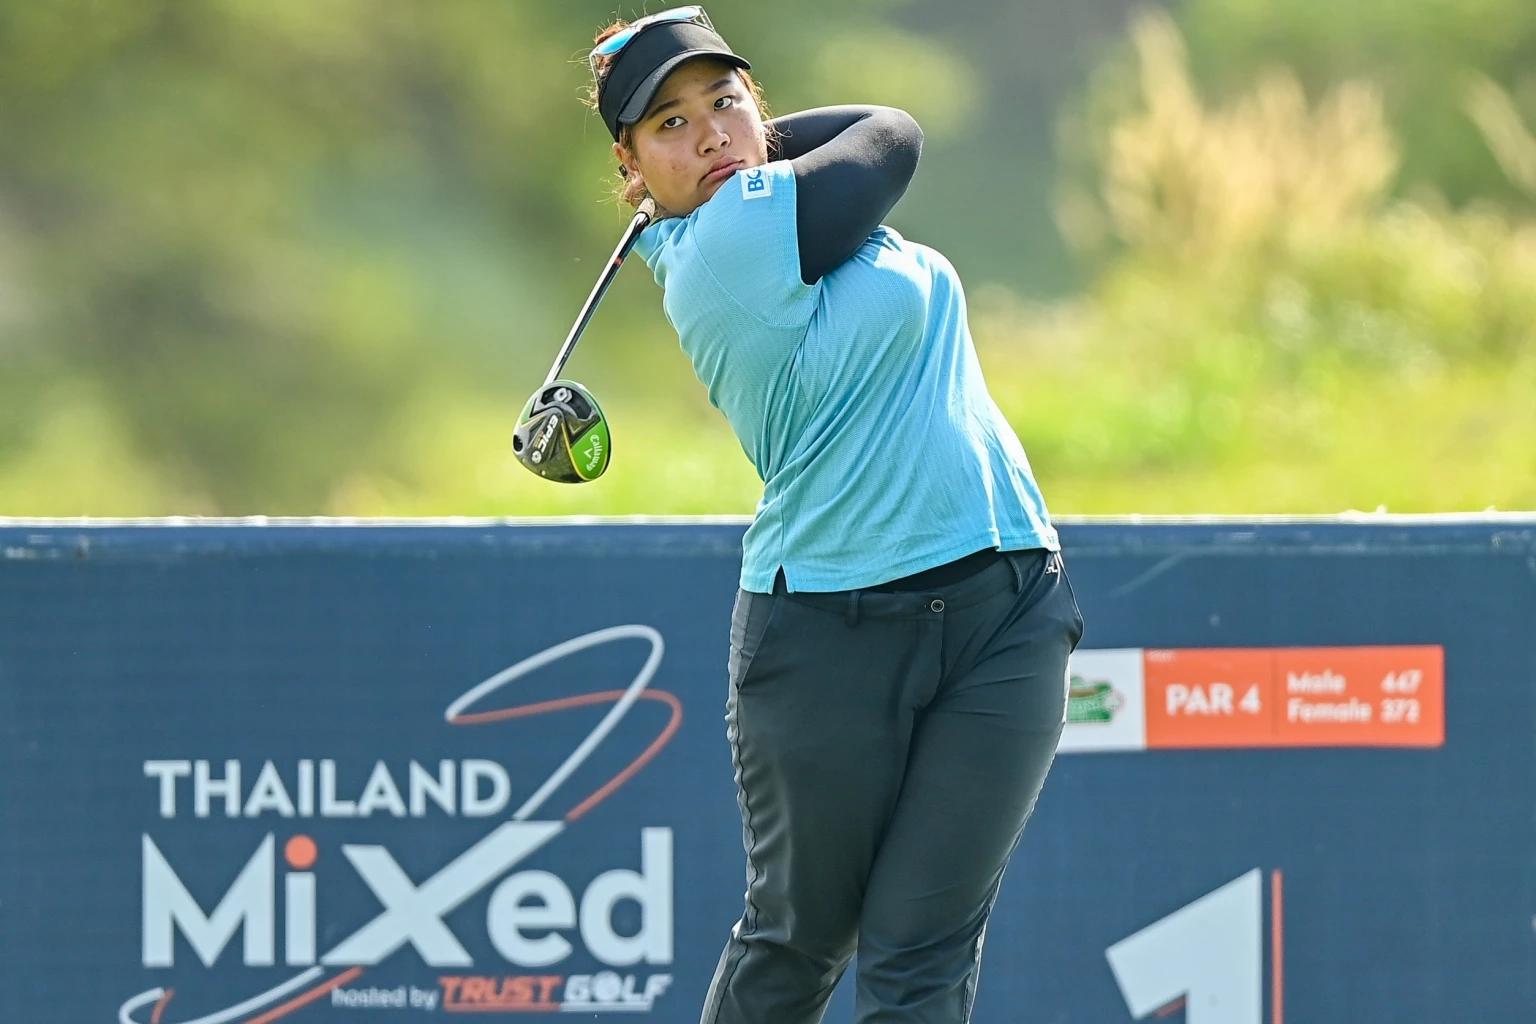 Unstoppable Chanette Guns for Thailand Mixed Hat Trick